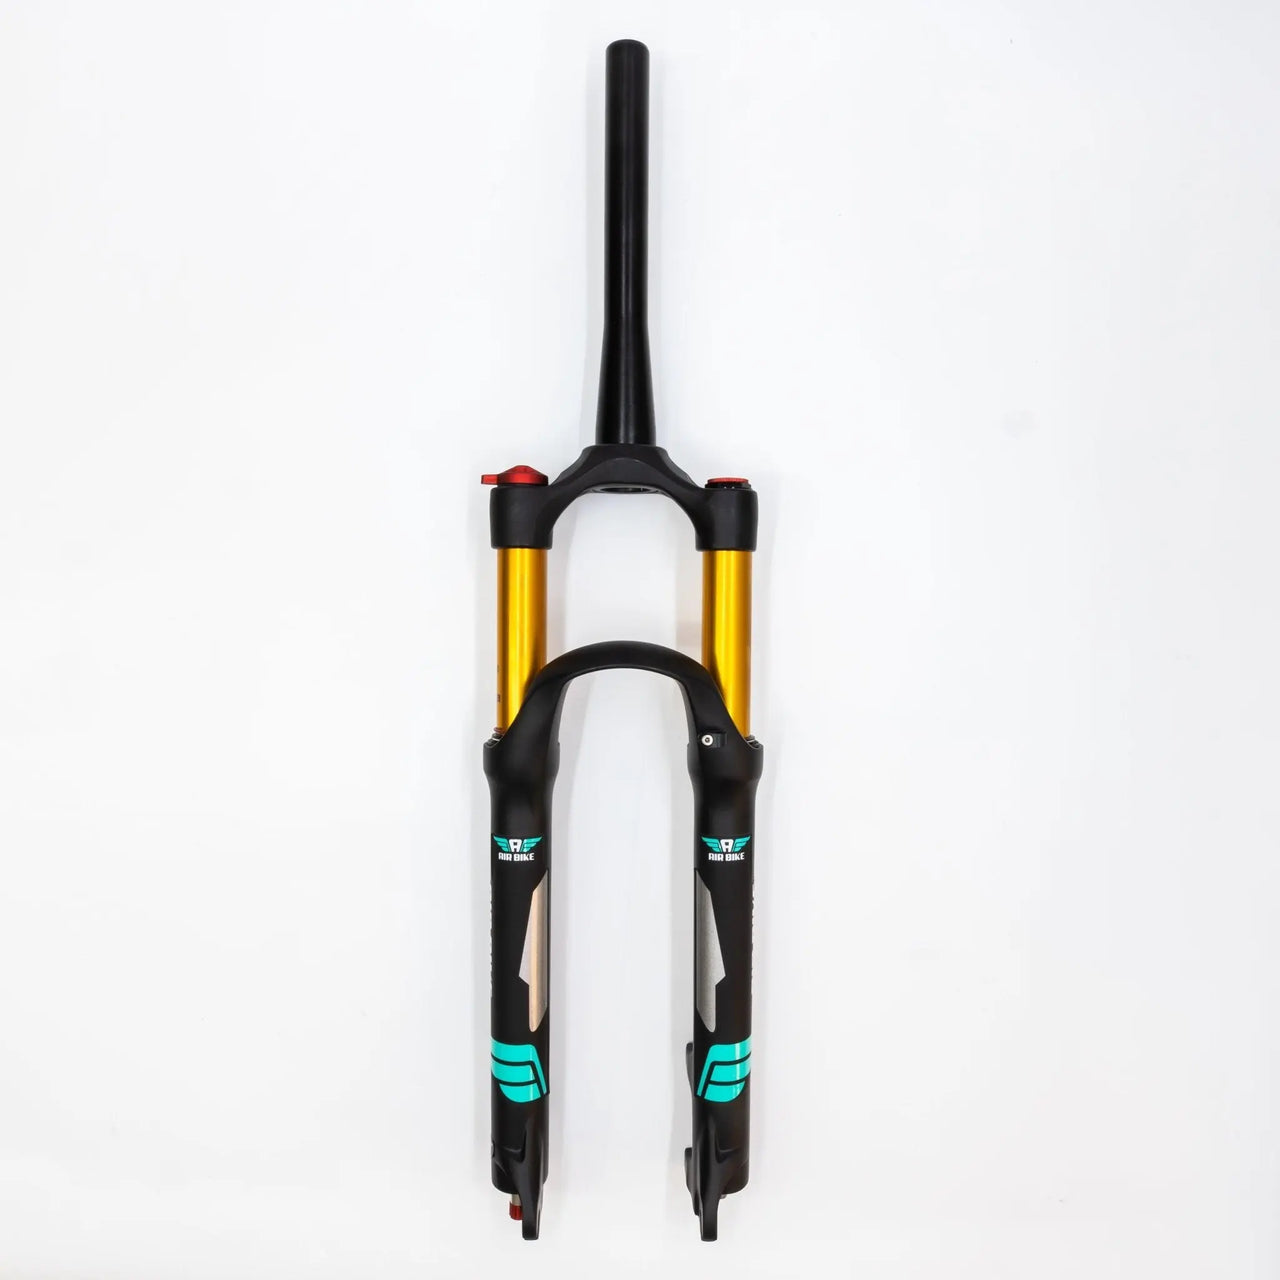 26 Inch Air Fork Tapered XC32A Black 100mm Travel & Rebound Suspension Fork Air Bike - Air BikeSuspension Fork